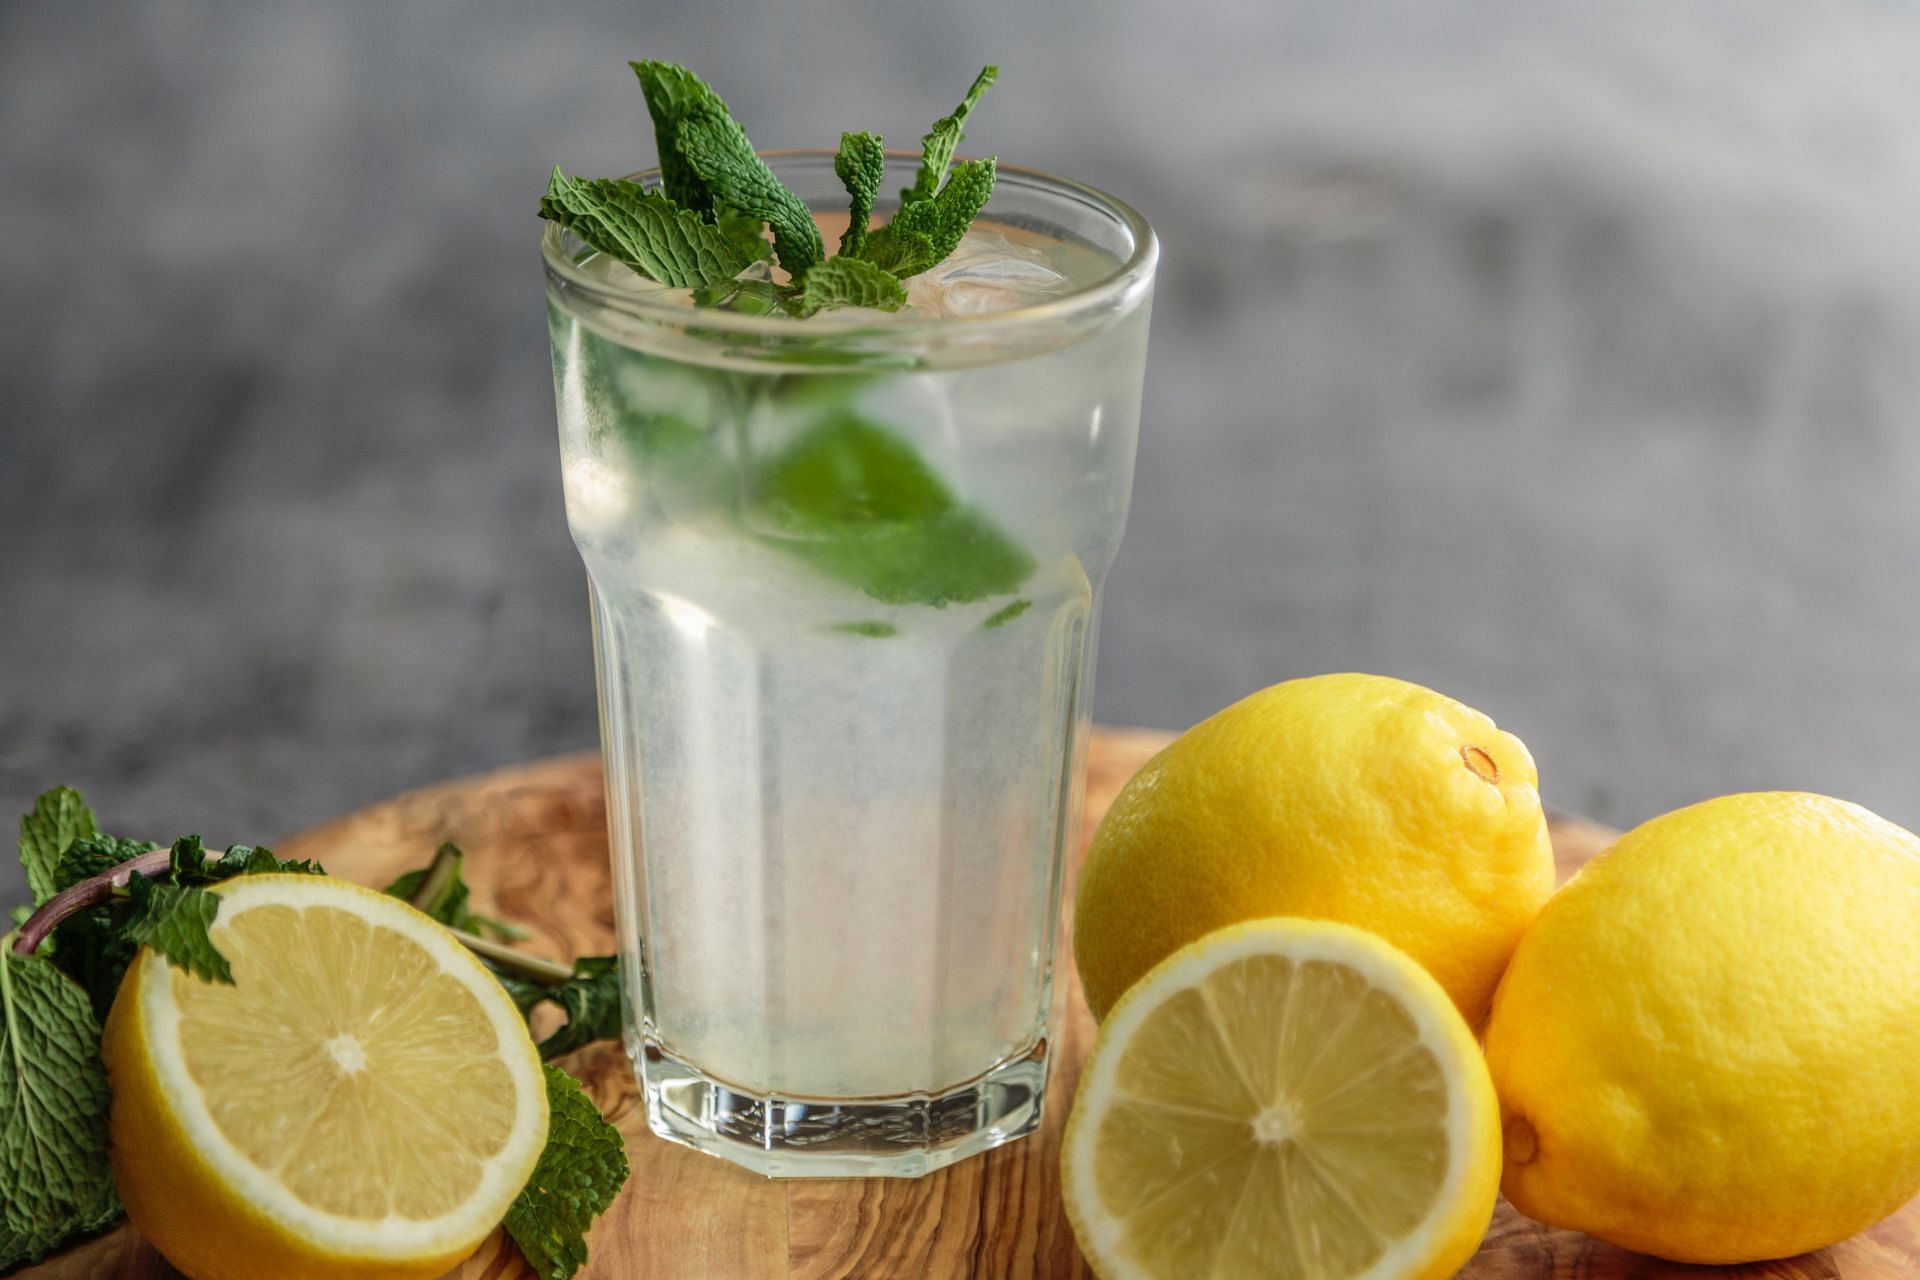 The lemonade diet for weight loss and its benefits (Image via Unsplash/Francesca Hotchin)